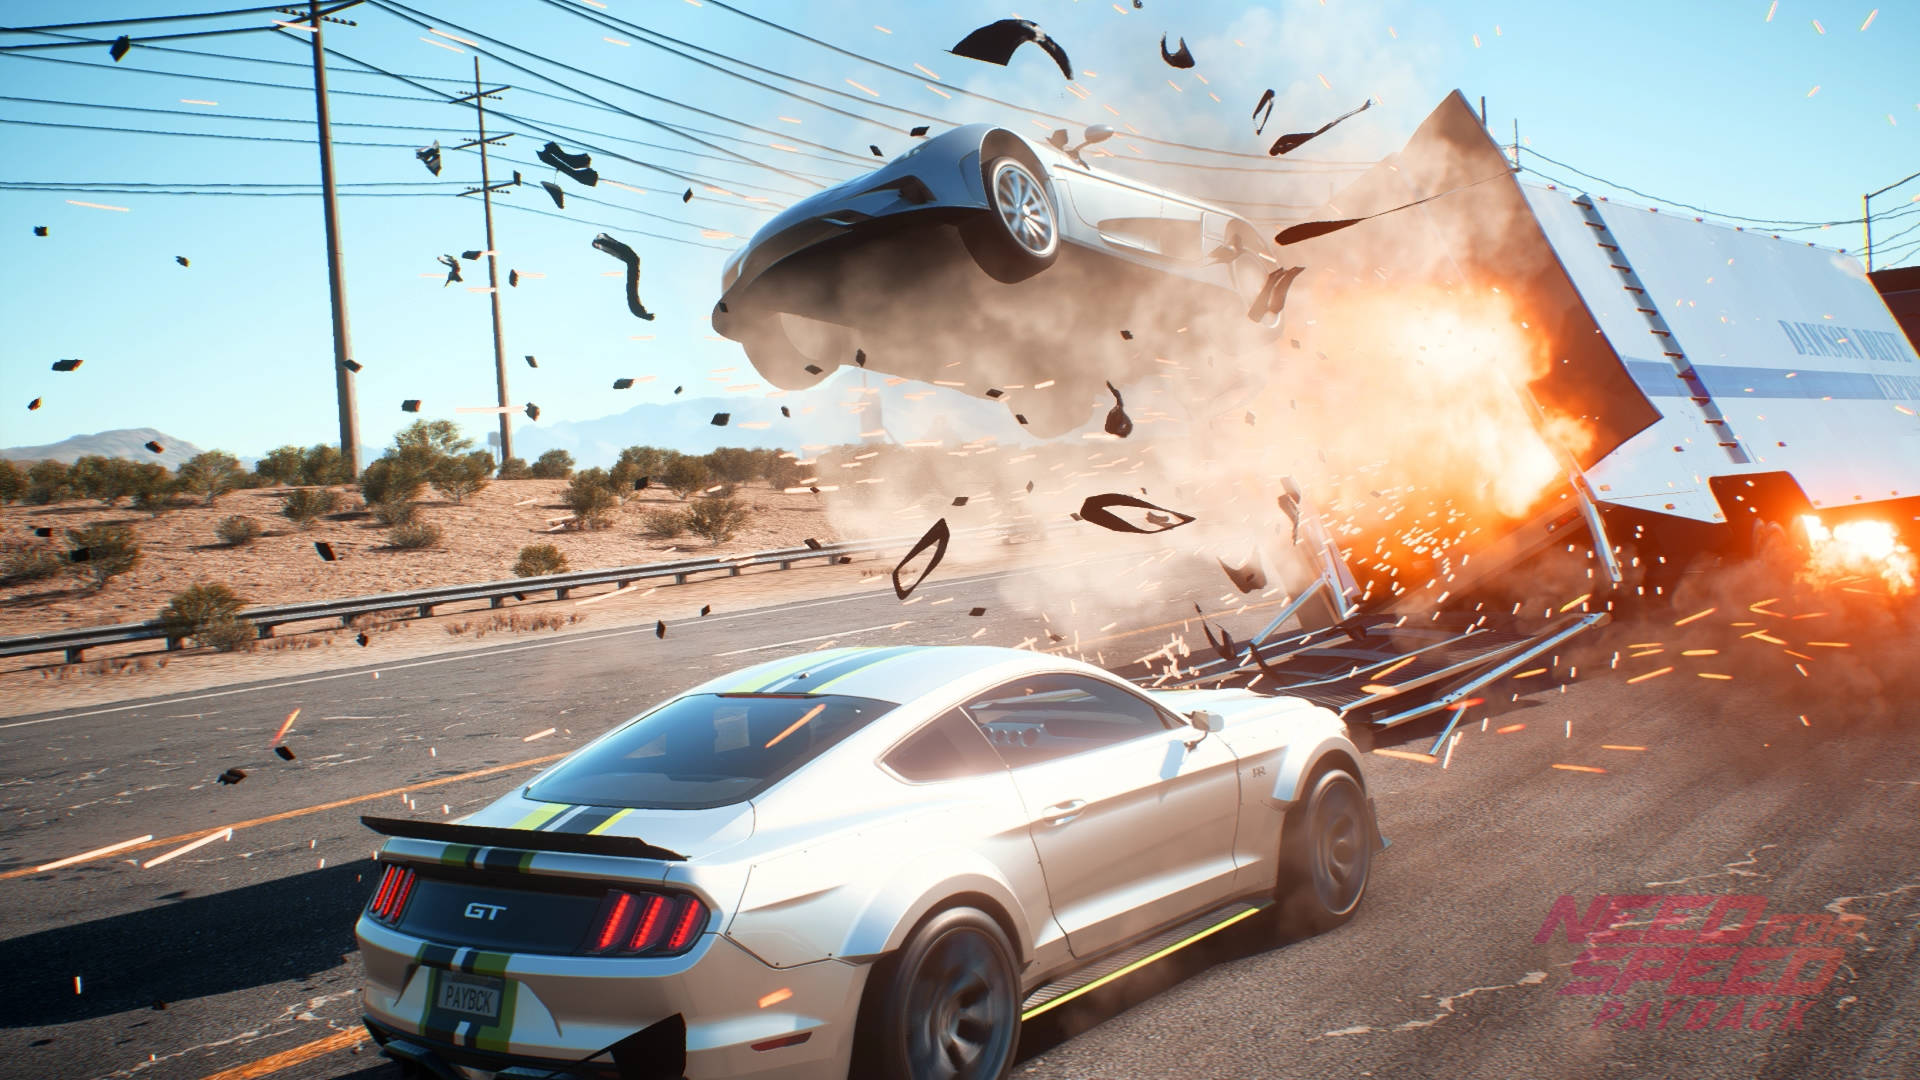 Thrilling Action In Need For Speed Payback - Car Crashing Scene